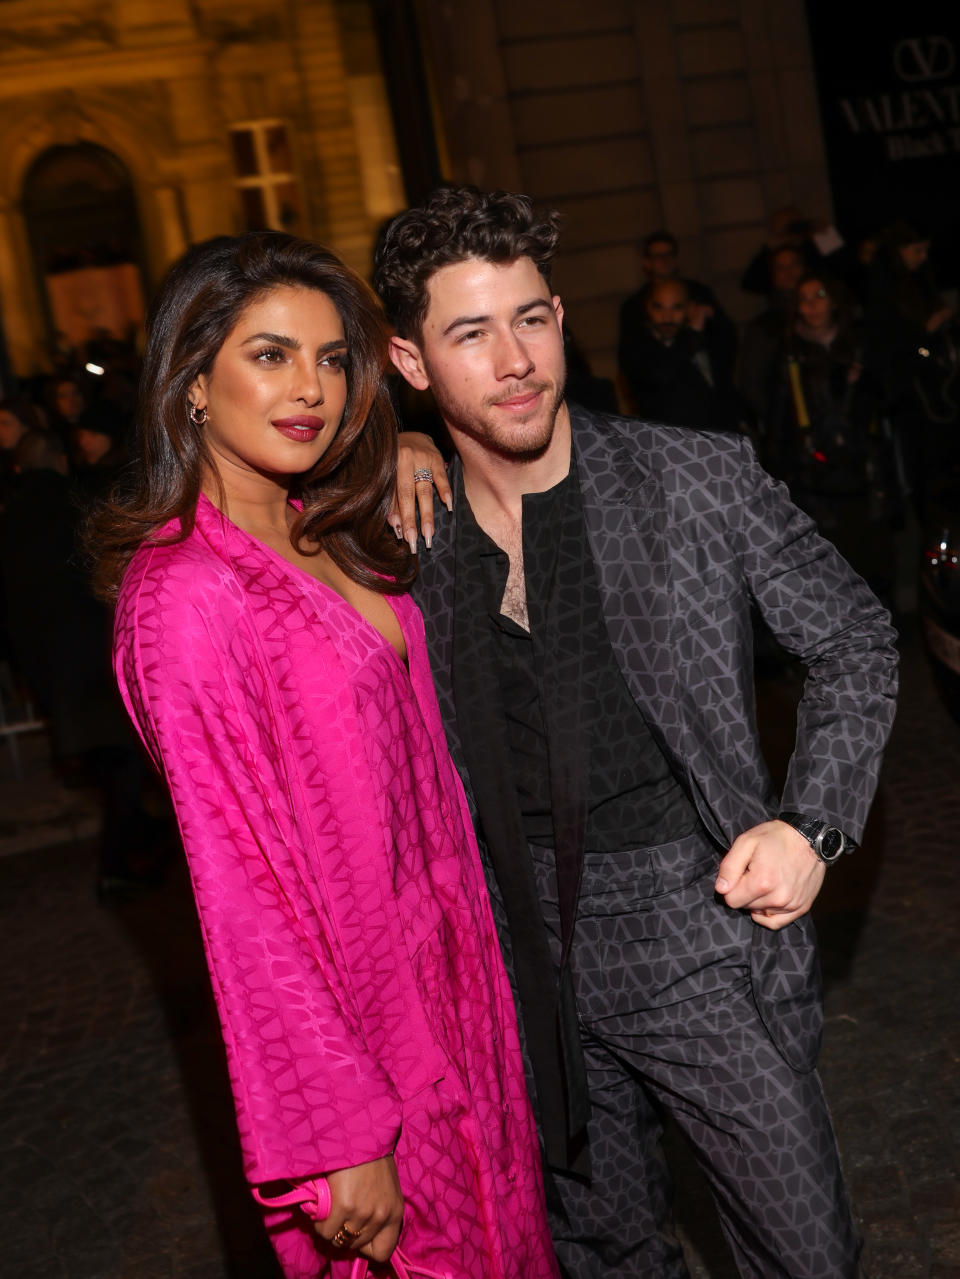 PARIS, FRANCE - MARCH 05: Priyanka Chopra and Nick Jonas attend the Valentino Womenswear Fall Winter 2023-2024 show as part of Paris Fashion Week on March 05, 2023 in Paris, France. (Photo by Arnold Jerocki/Getty Images)